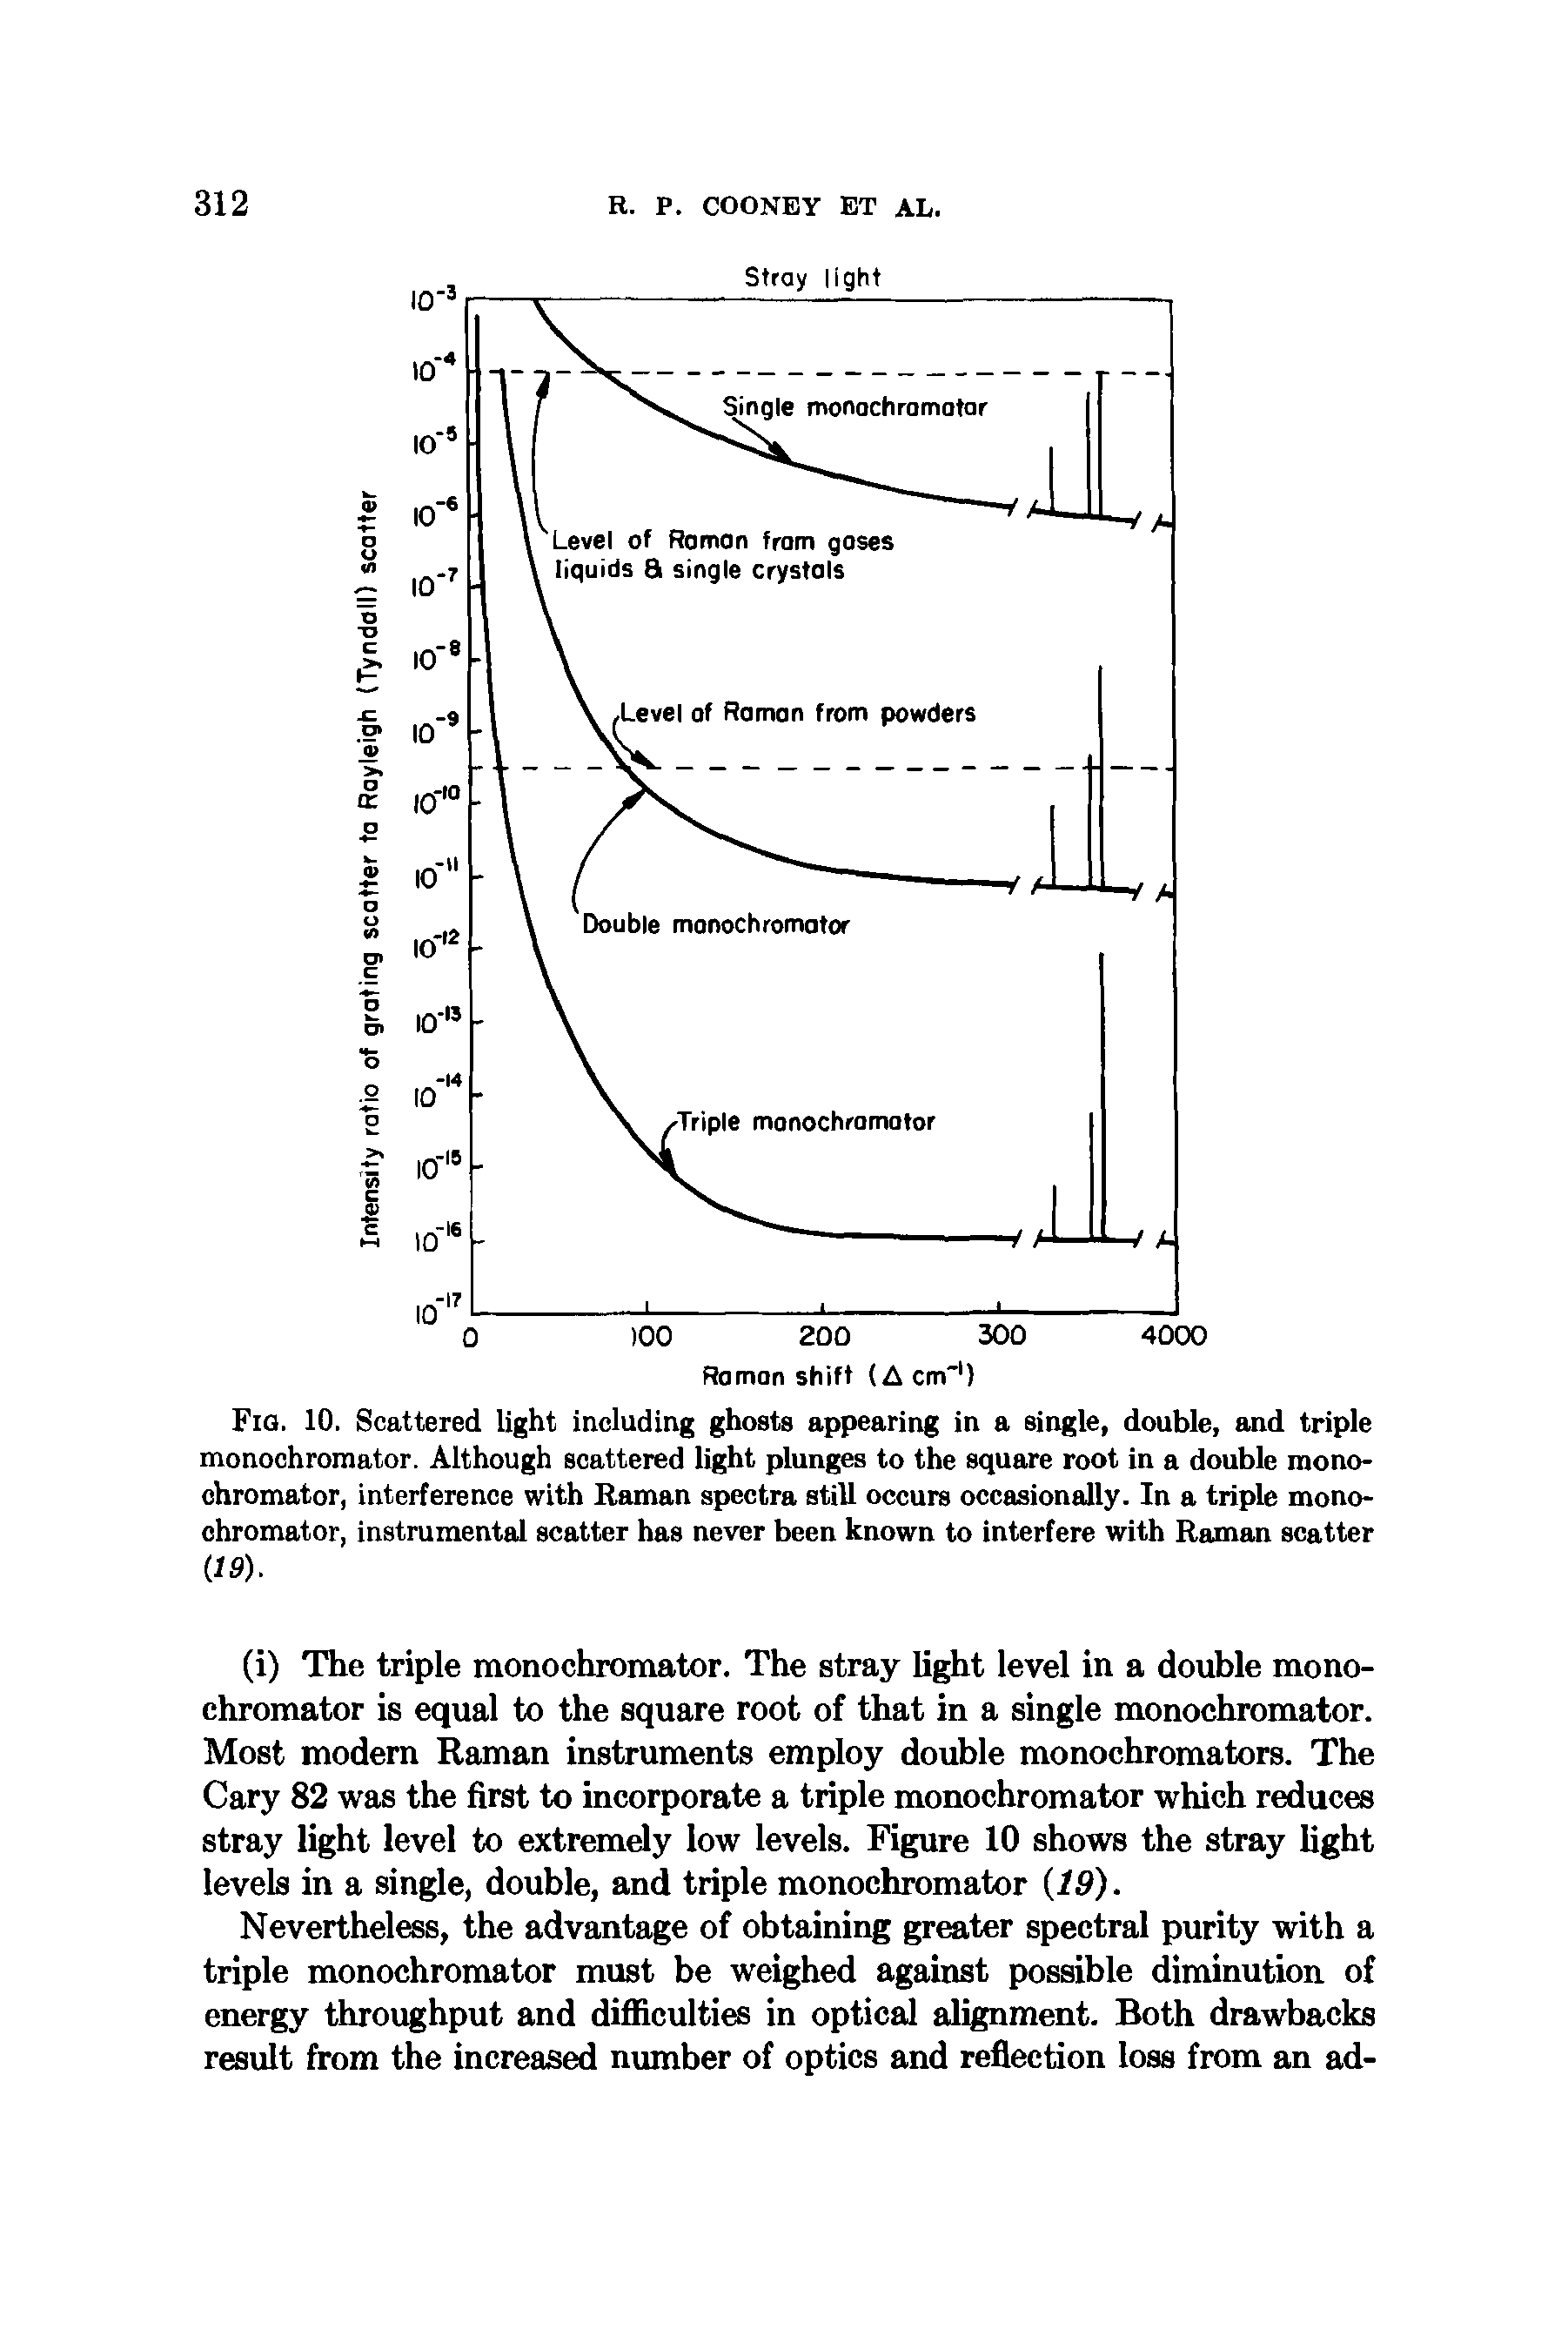 Fig. 10. Scattered light including ghosts appearing in a single, double, and triple monochromator. Although scattered light plunges to the square root in a double monochromator, interference with Raman spectra still occurs occasionally. In a triple monochromator, instrumental scatter has never been known to interfere with Raman scatter...